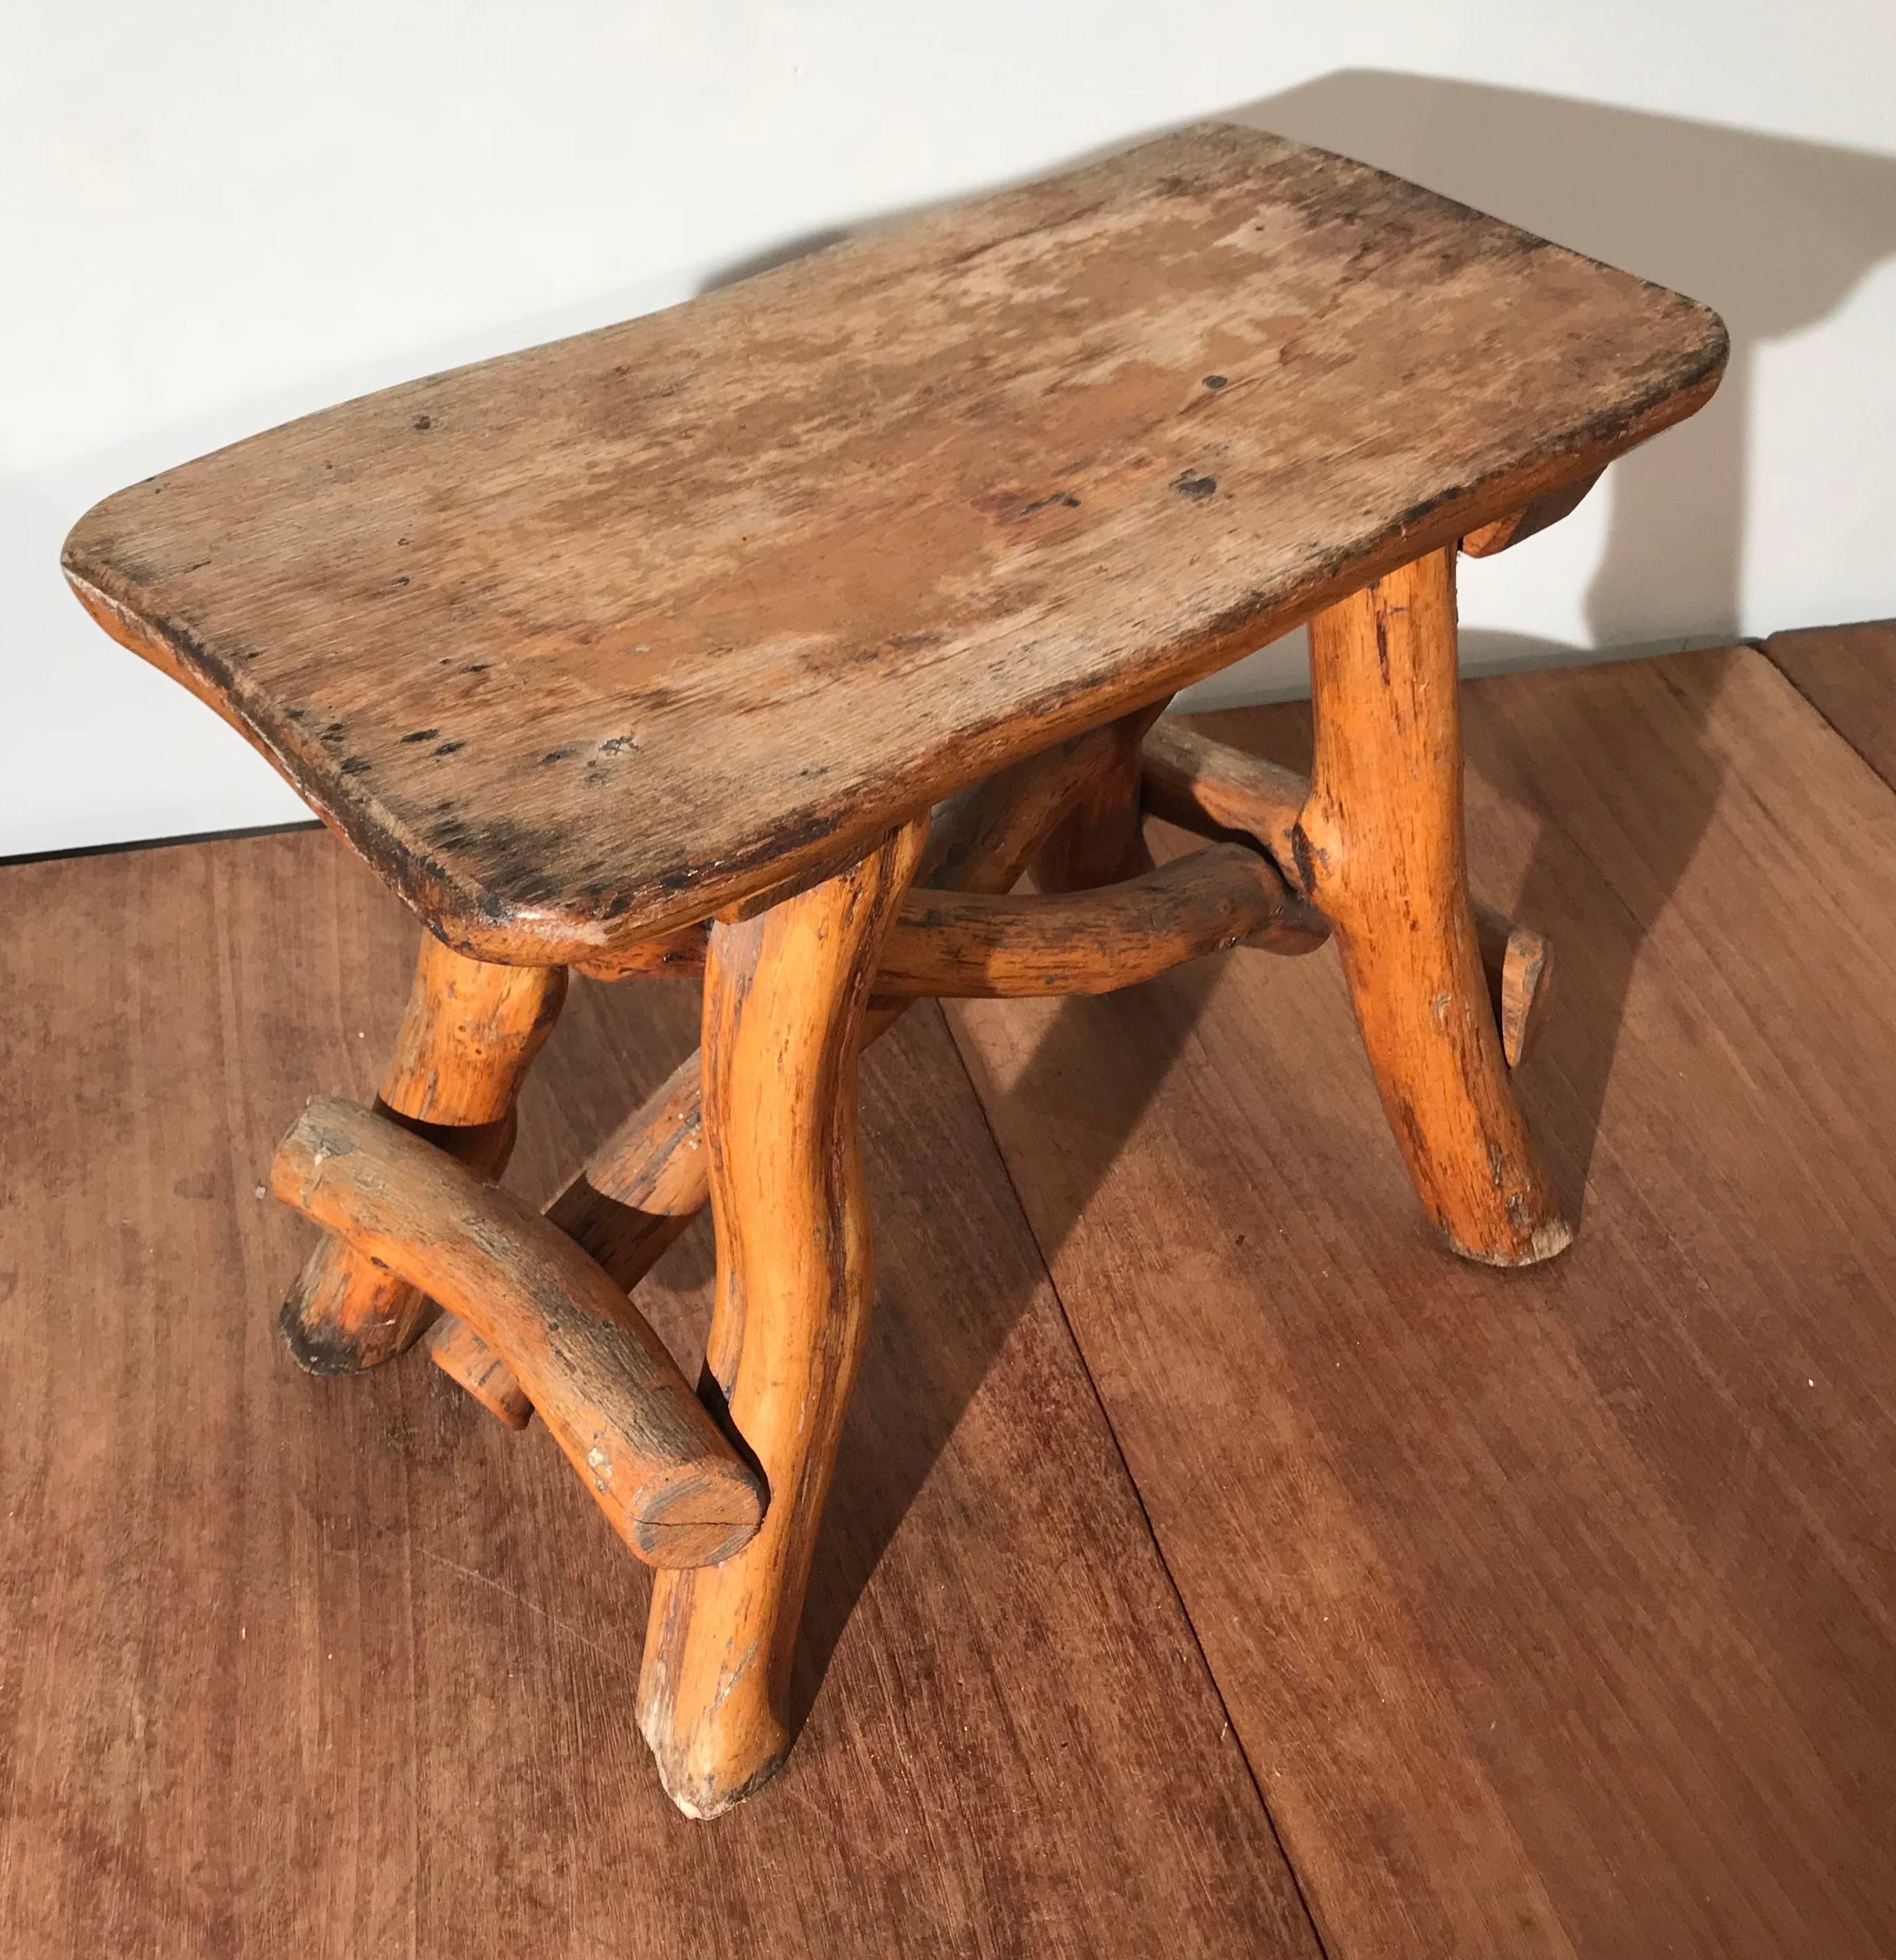 Antique Hand-Crafted Rustic and Organic Oak Tree Stool for Indoor or Outdoor For Sale 4